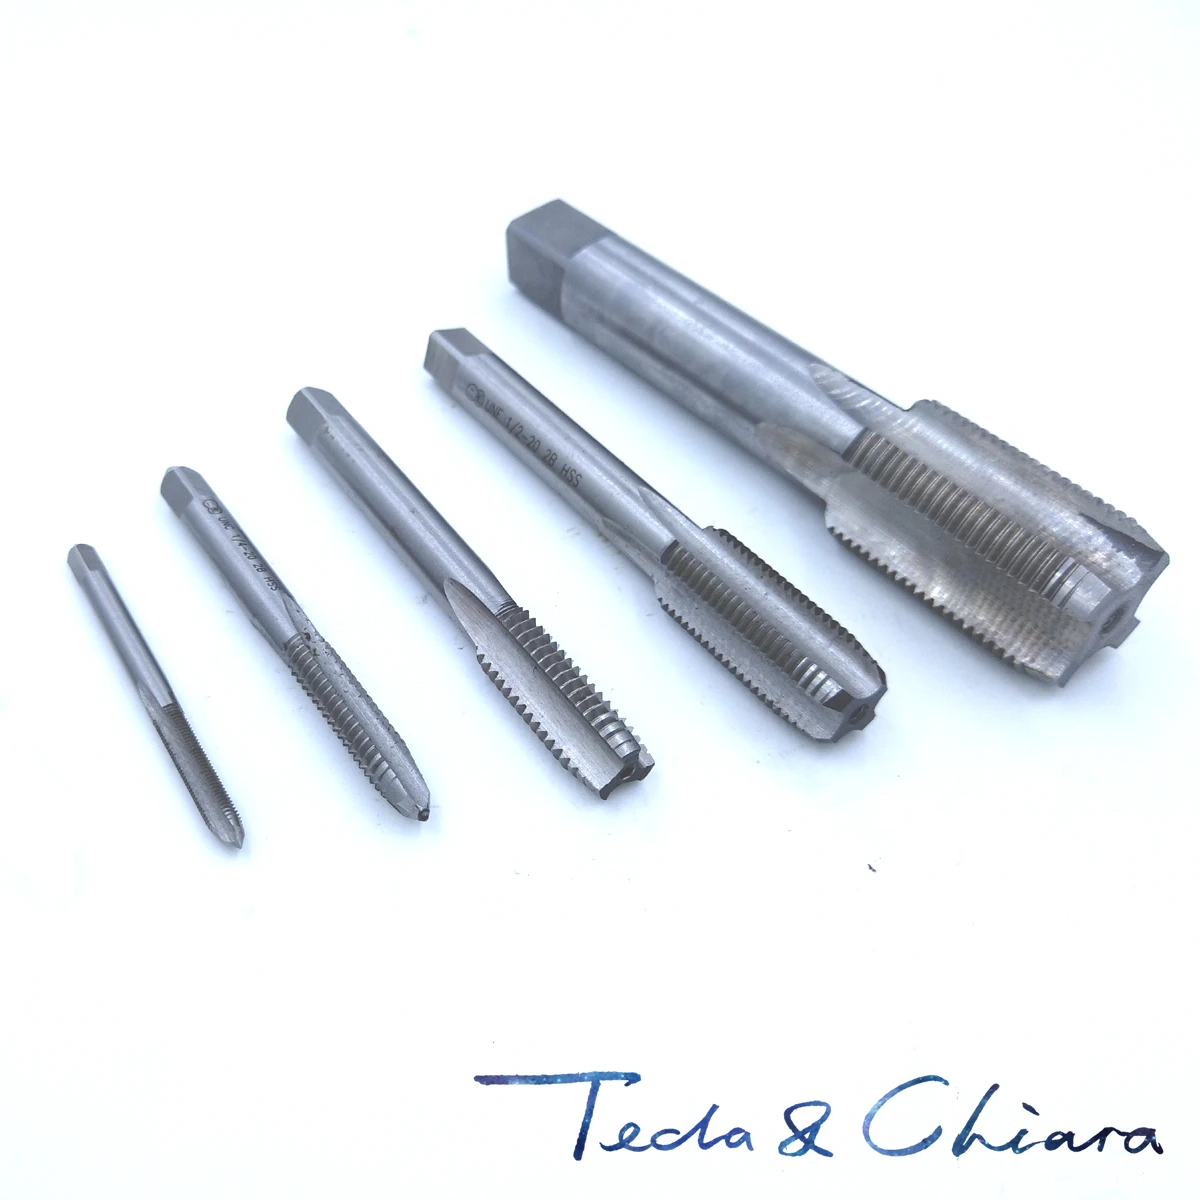 M10 M11 M12 M13 M14 M15 Metric HSS Right Hand Tap Pitch Threading Tools For Mold Machining Free Shipping